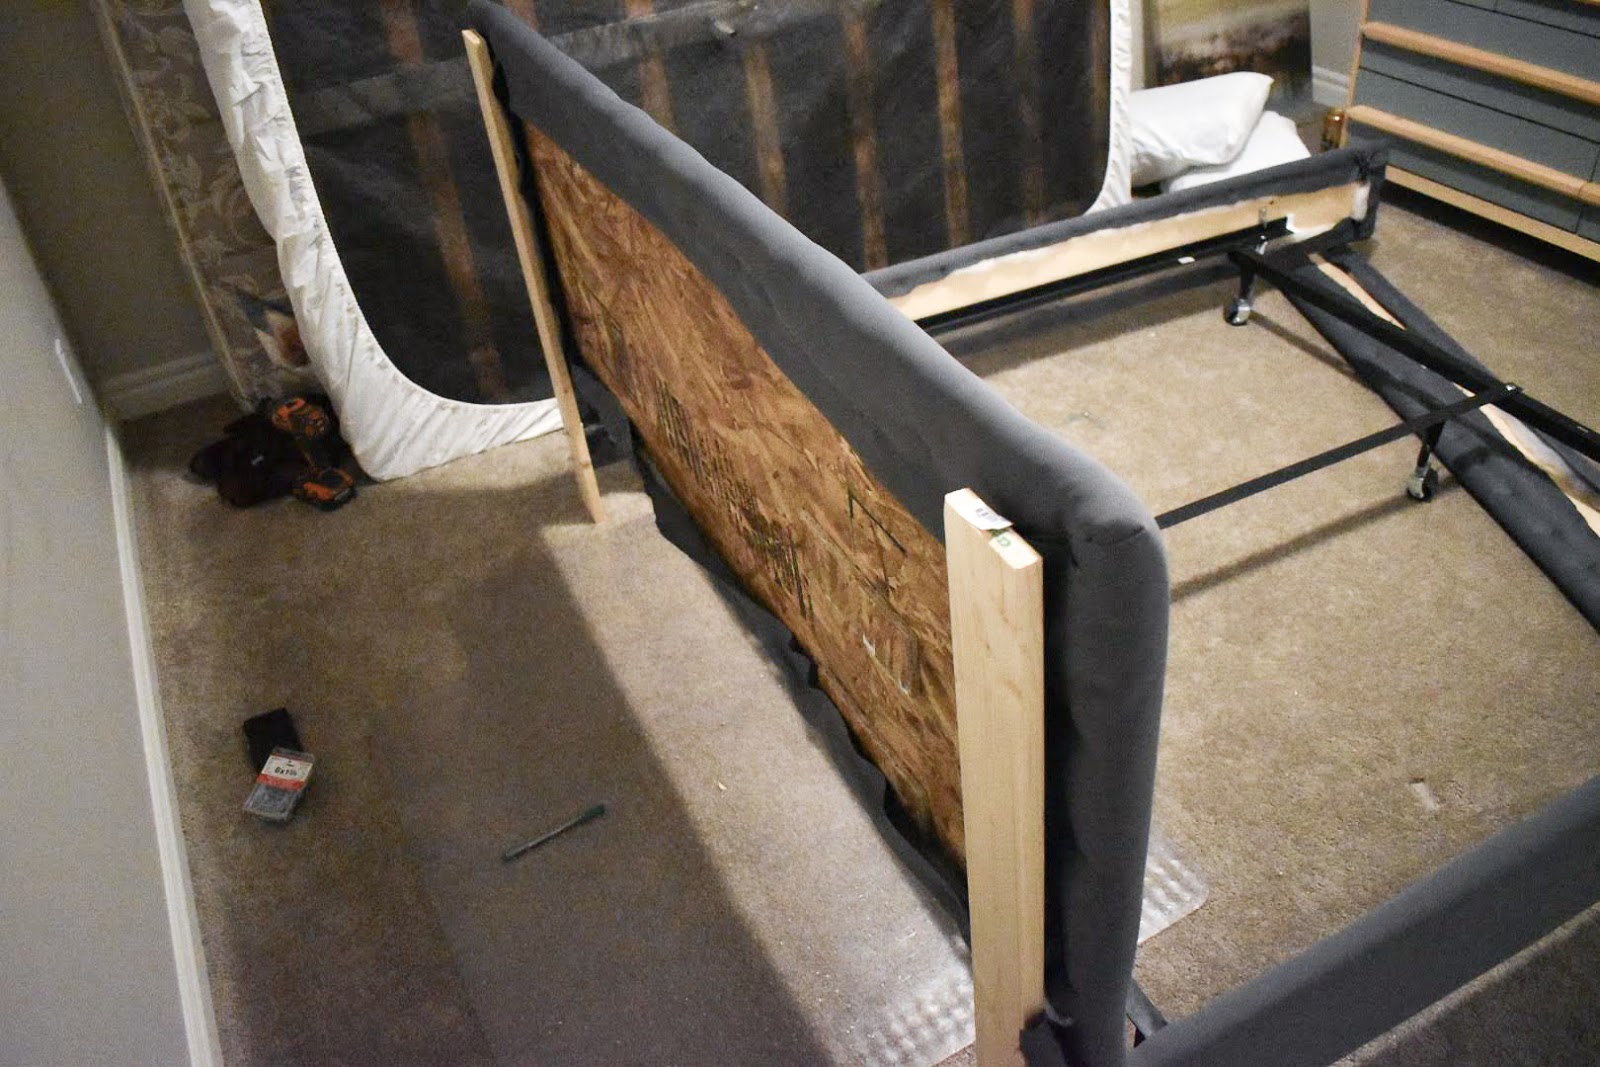 Metal Bed Frame Into An Upholstered, How To Attach A Headboard To A Metal Platform Bed